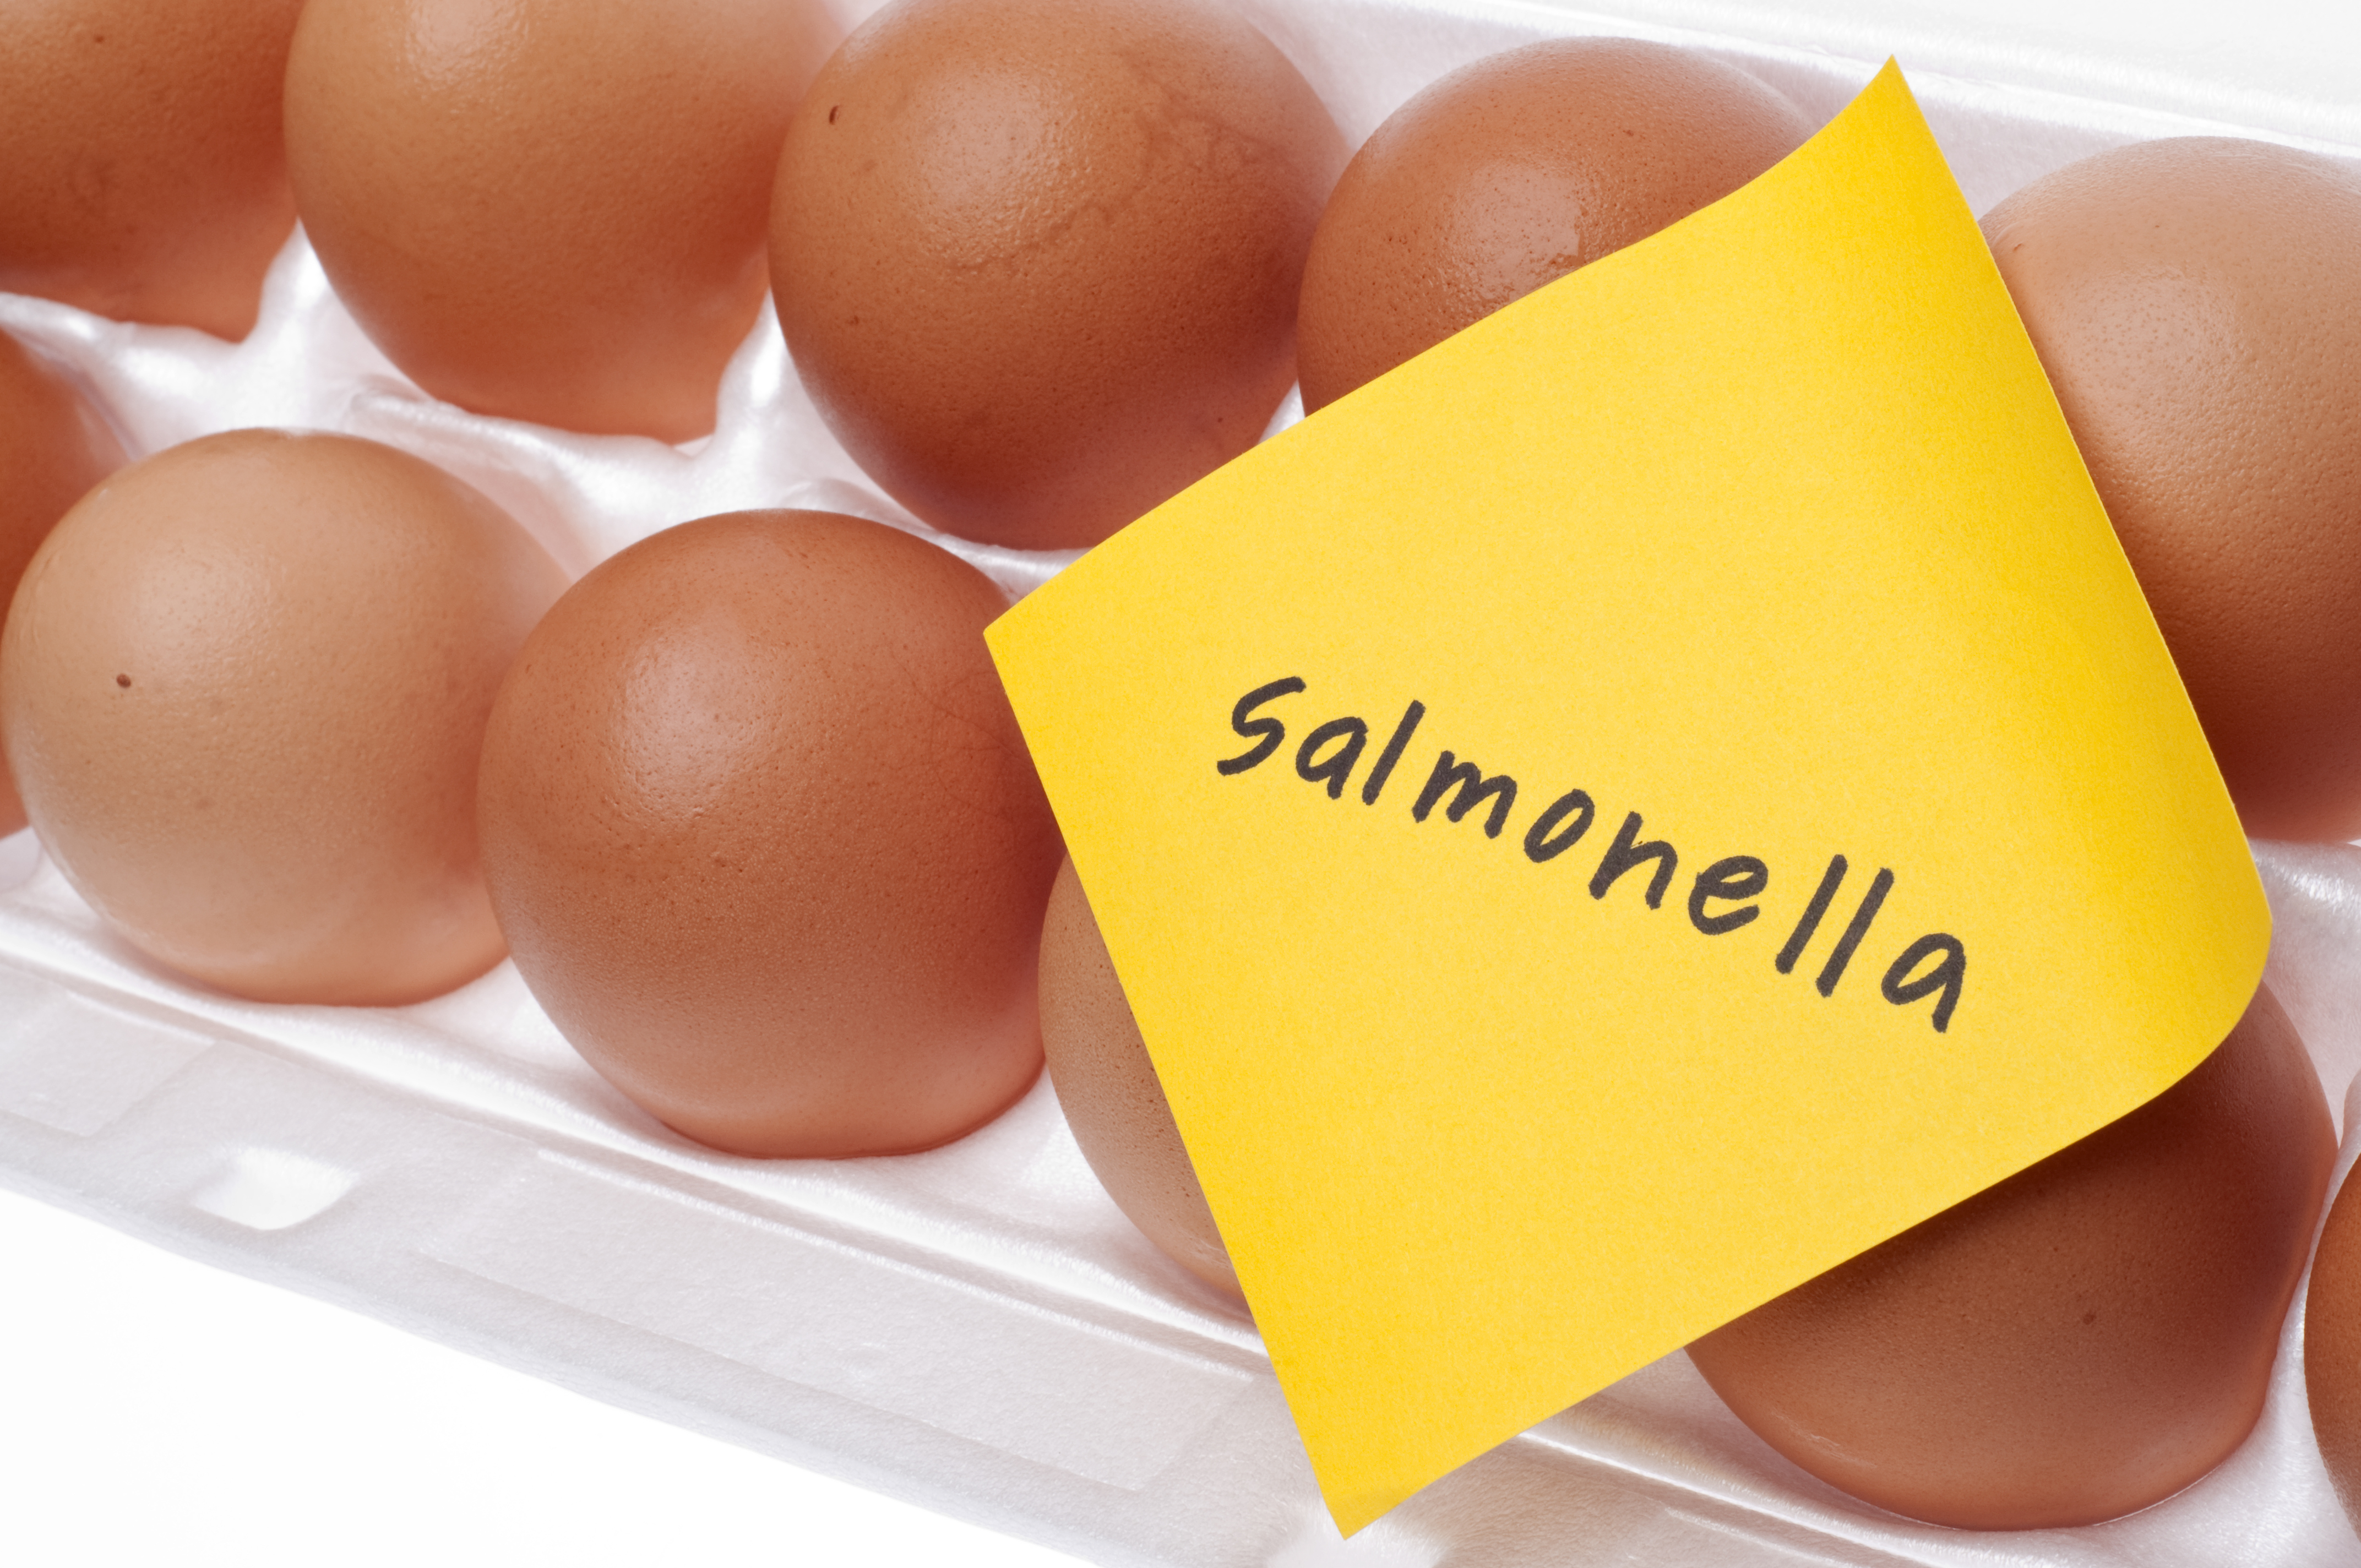 Carton of eggs with a sticky note reading "Salmonella" on it